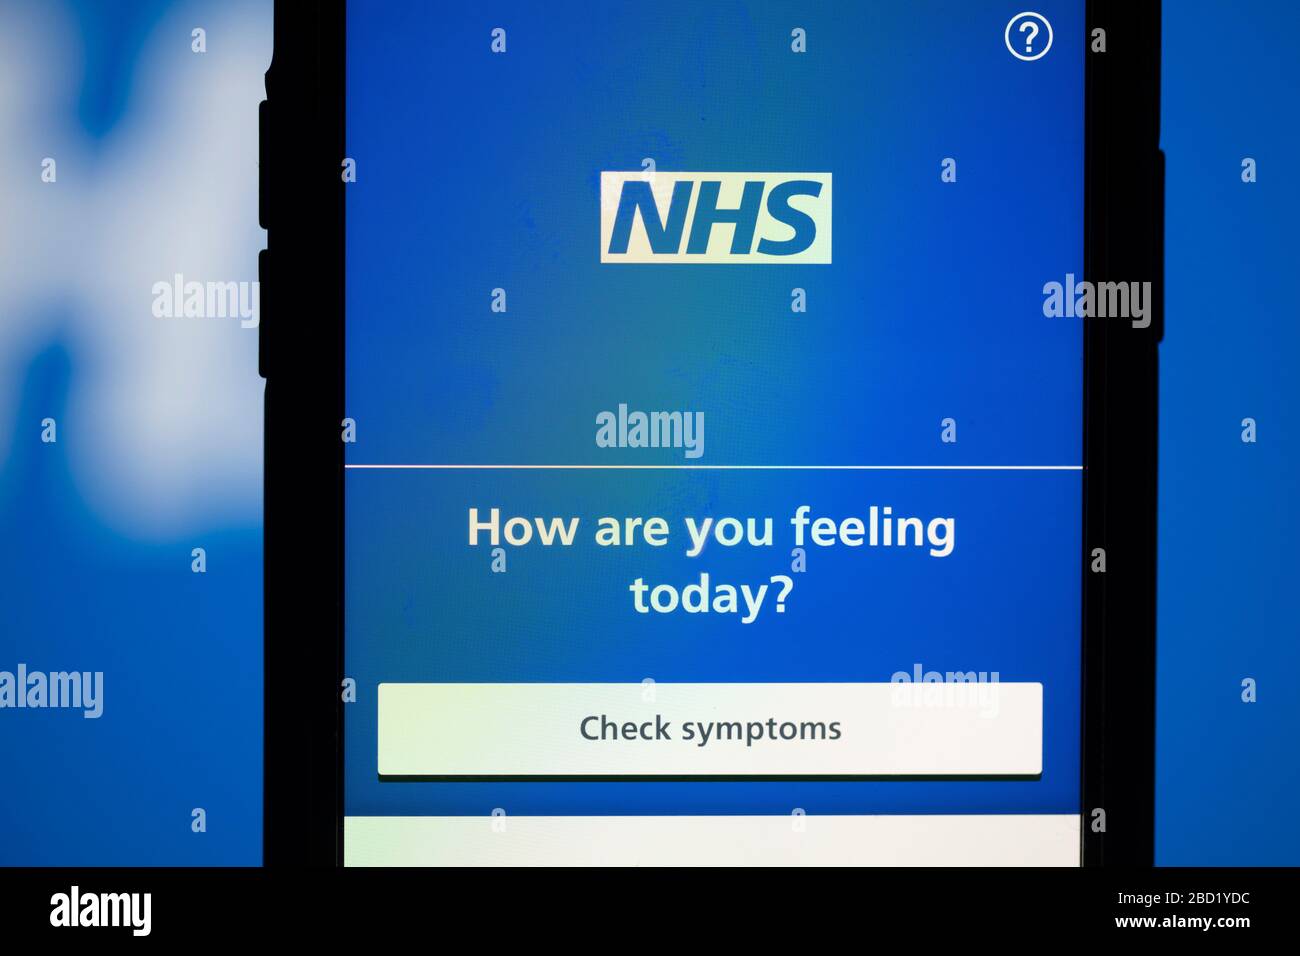 LONDON, UK - April 6th 2020: NHS National health service app on a smartphone Stock Photo